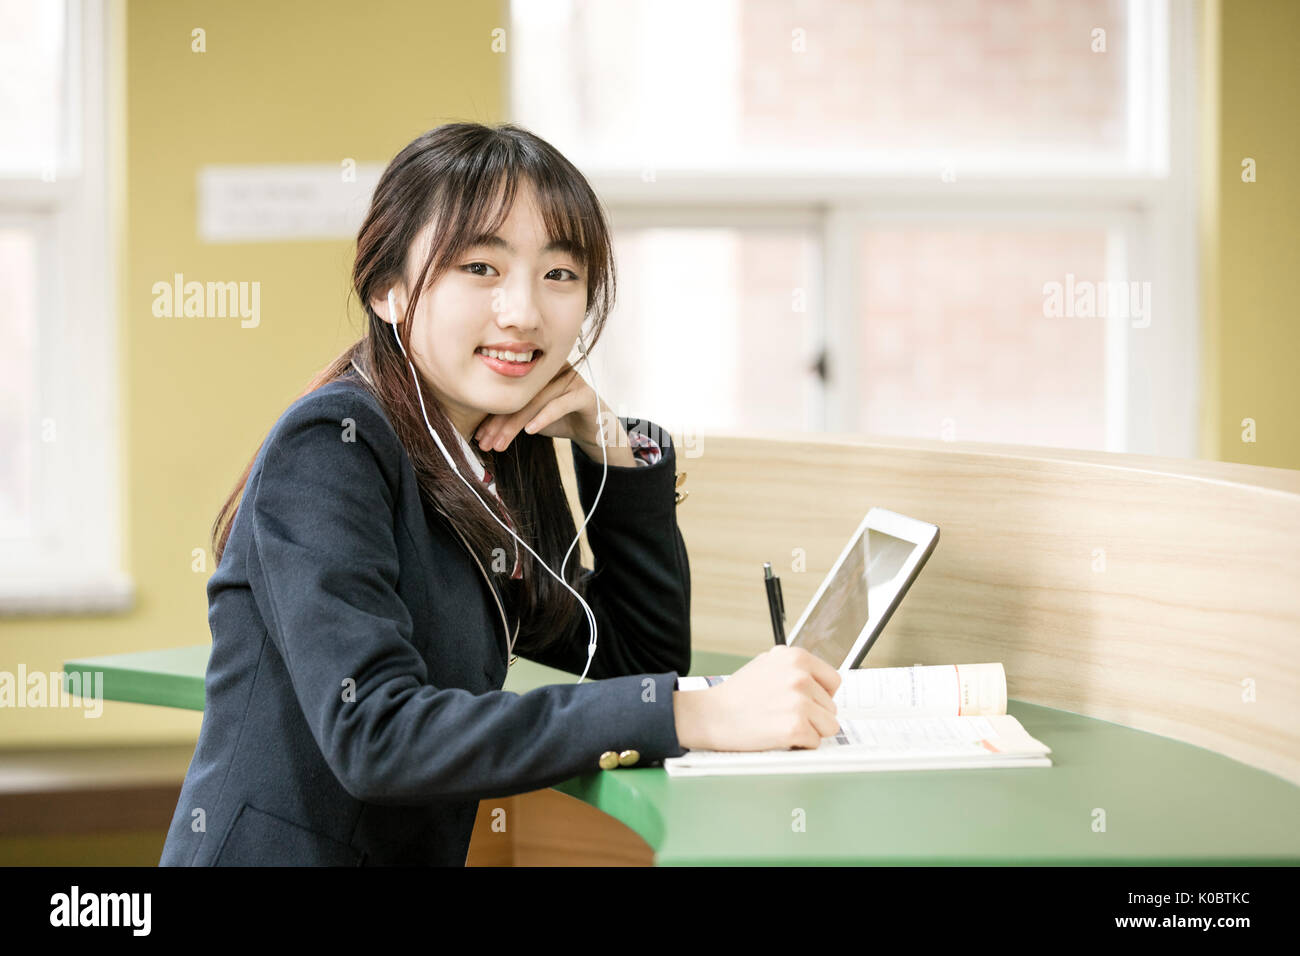 Portrait of smiling school girl studying on tablet Banque D'Images